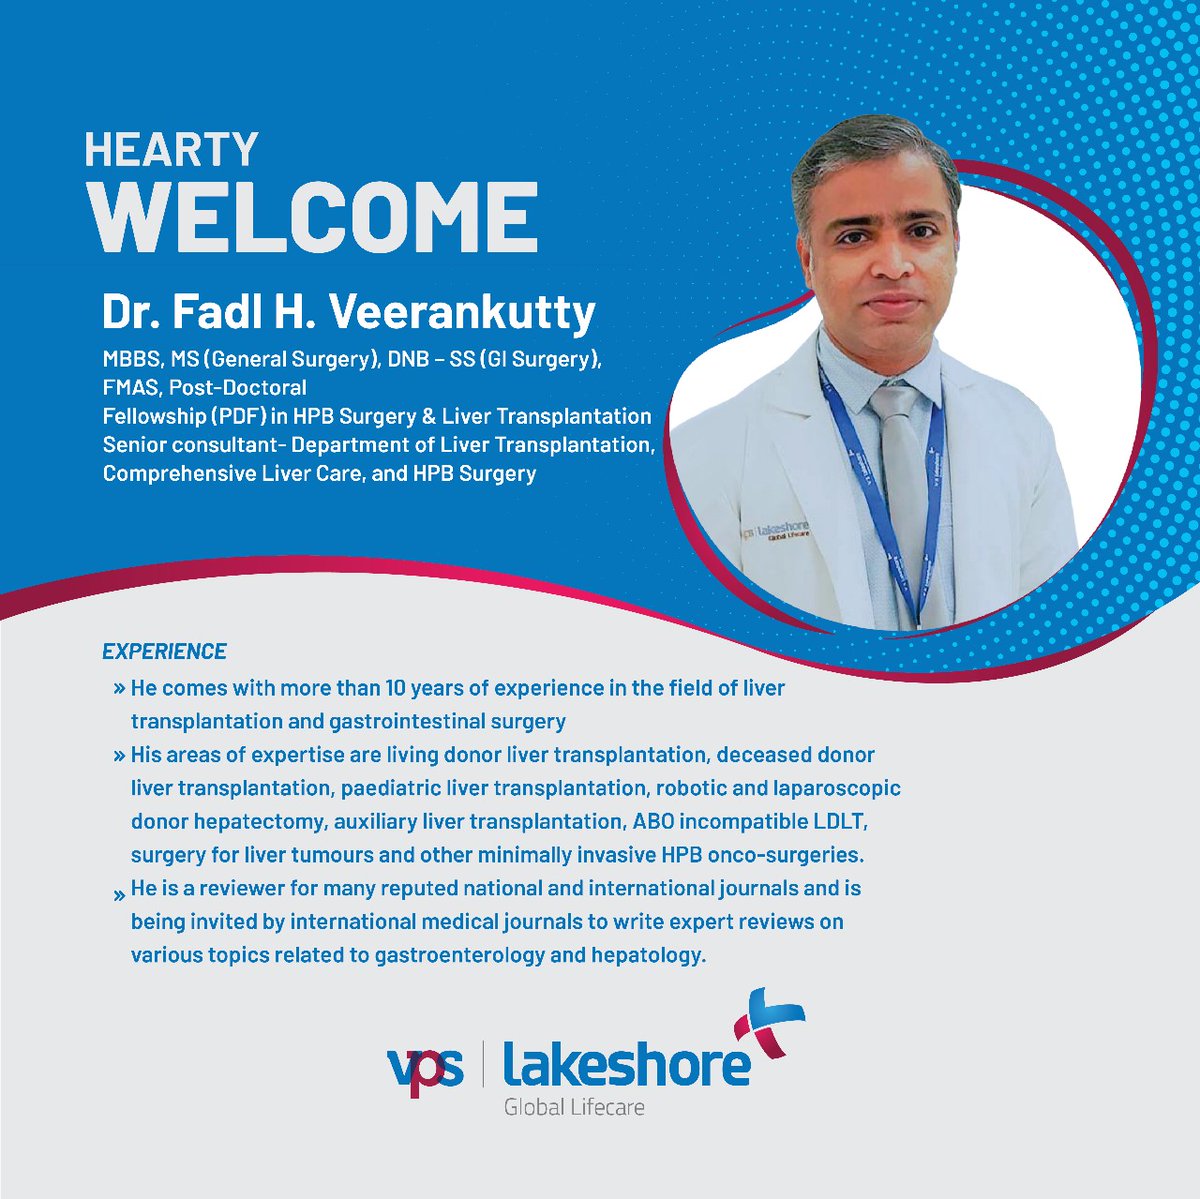 We are delighted to welcome Dr. Fadl H. Veerankutty (Senior Consultant) - Liver Transplantation, Comprehensive Liver Care, and HPB Surgery to the VPS Lakeshore Family. We are proud and happy to have you onboard!
.
#welcome #livertransplantsurgeon #livercancer #livertransplant